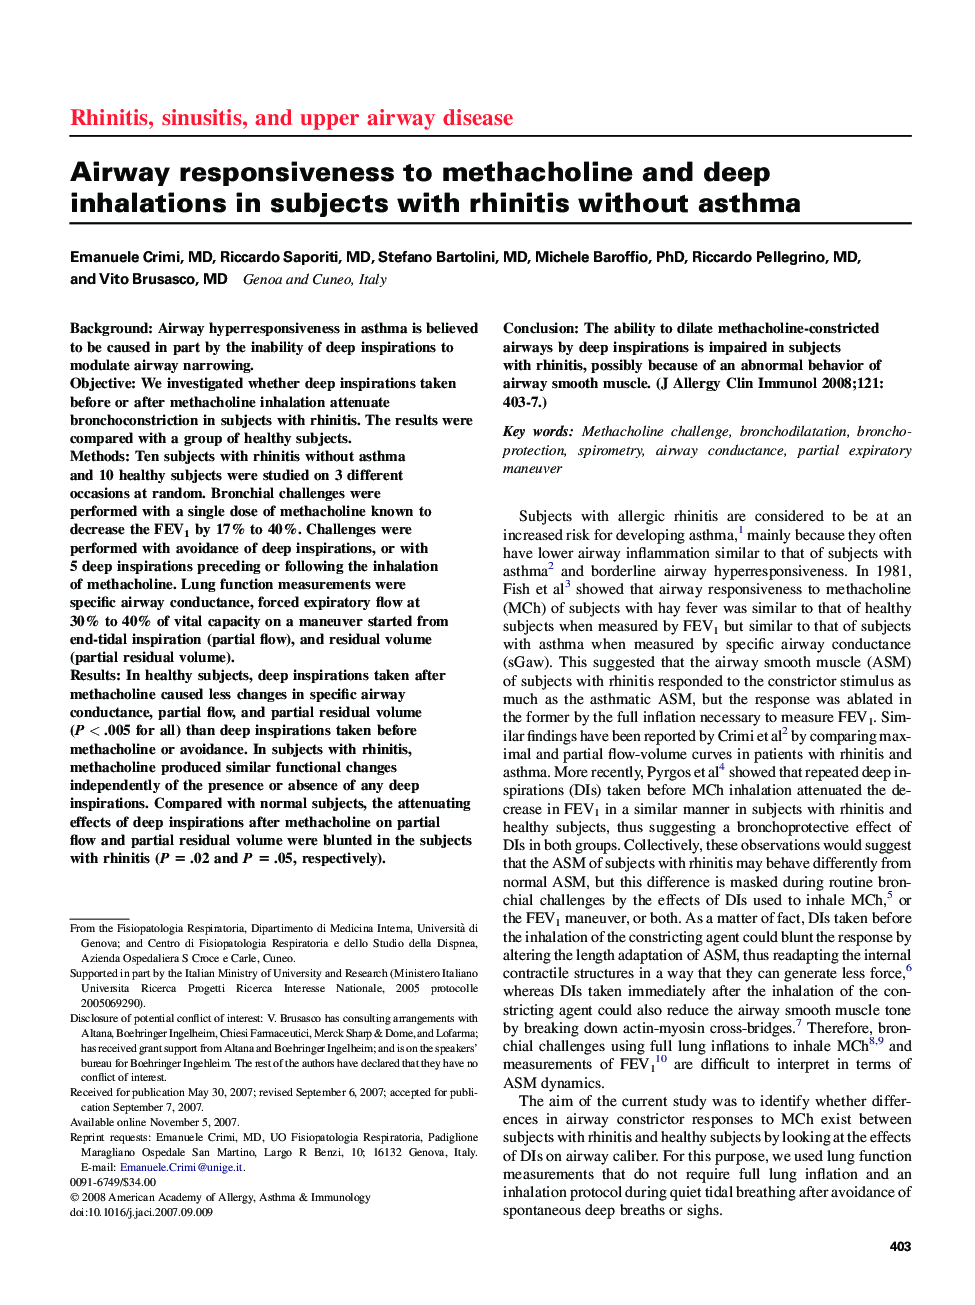 Airway responsiveness to methacholine and deep inhalations in subjects with rhinitis without asthma 